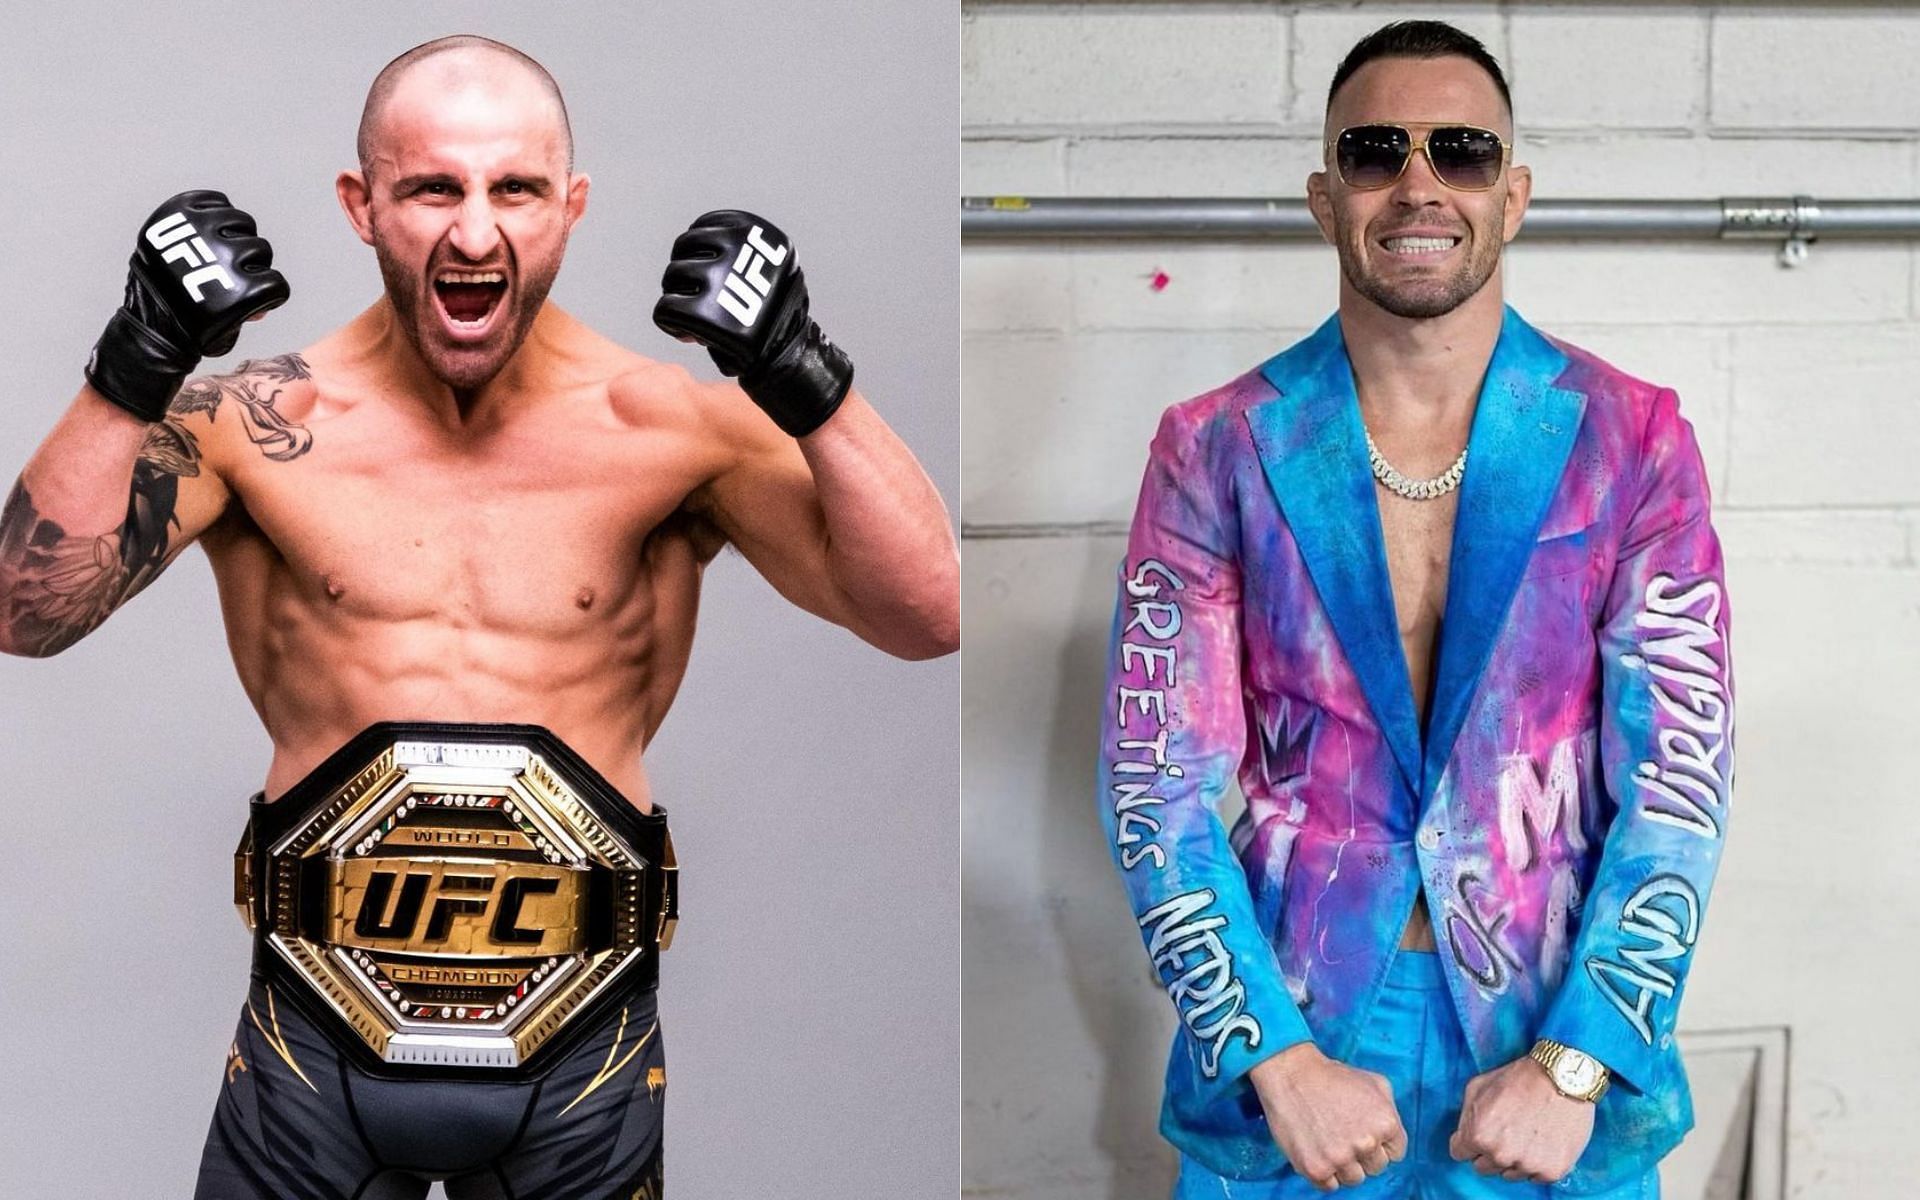 Alexander Volkanovski (left) and Colby Covington (right) [Image credits: @colbycovmma and @ufc on Instagram]